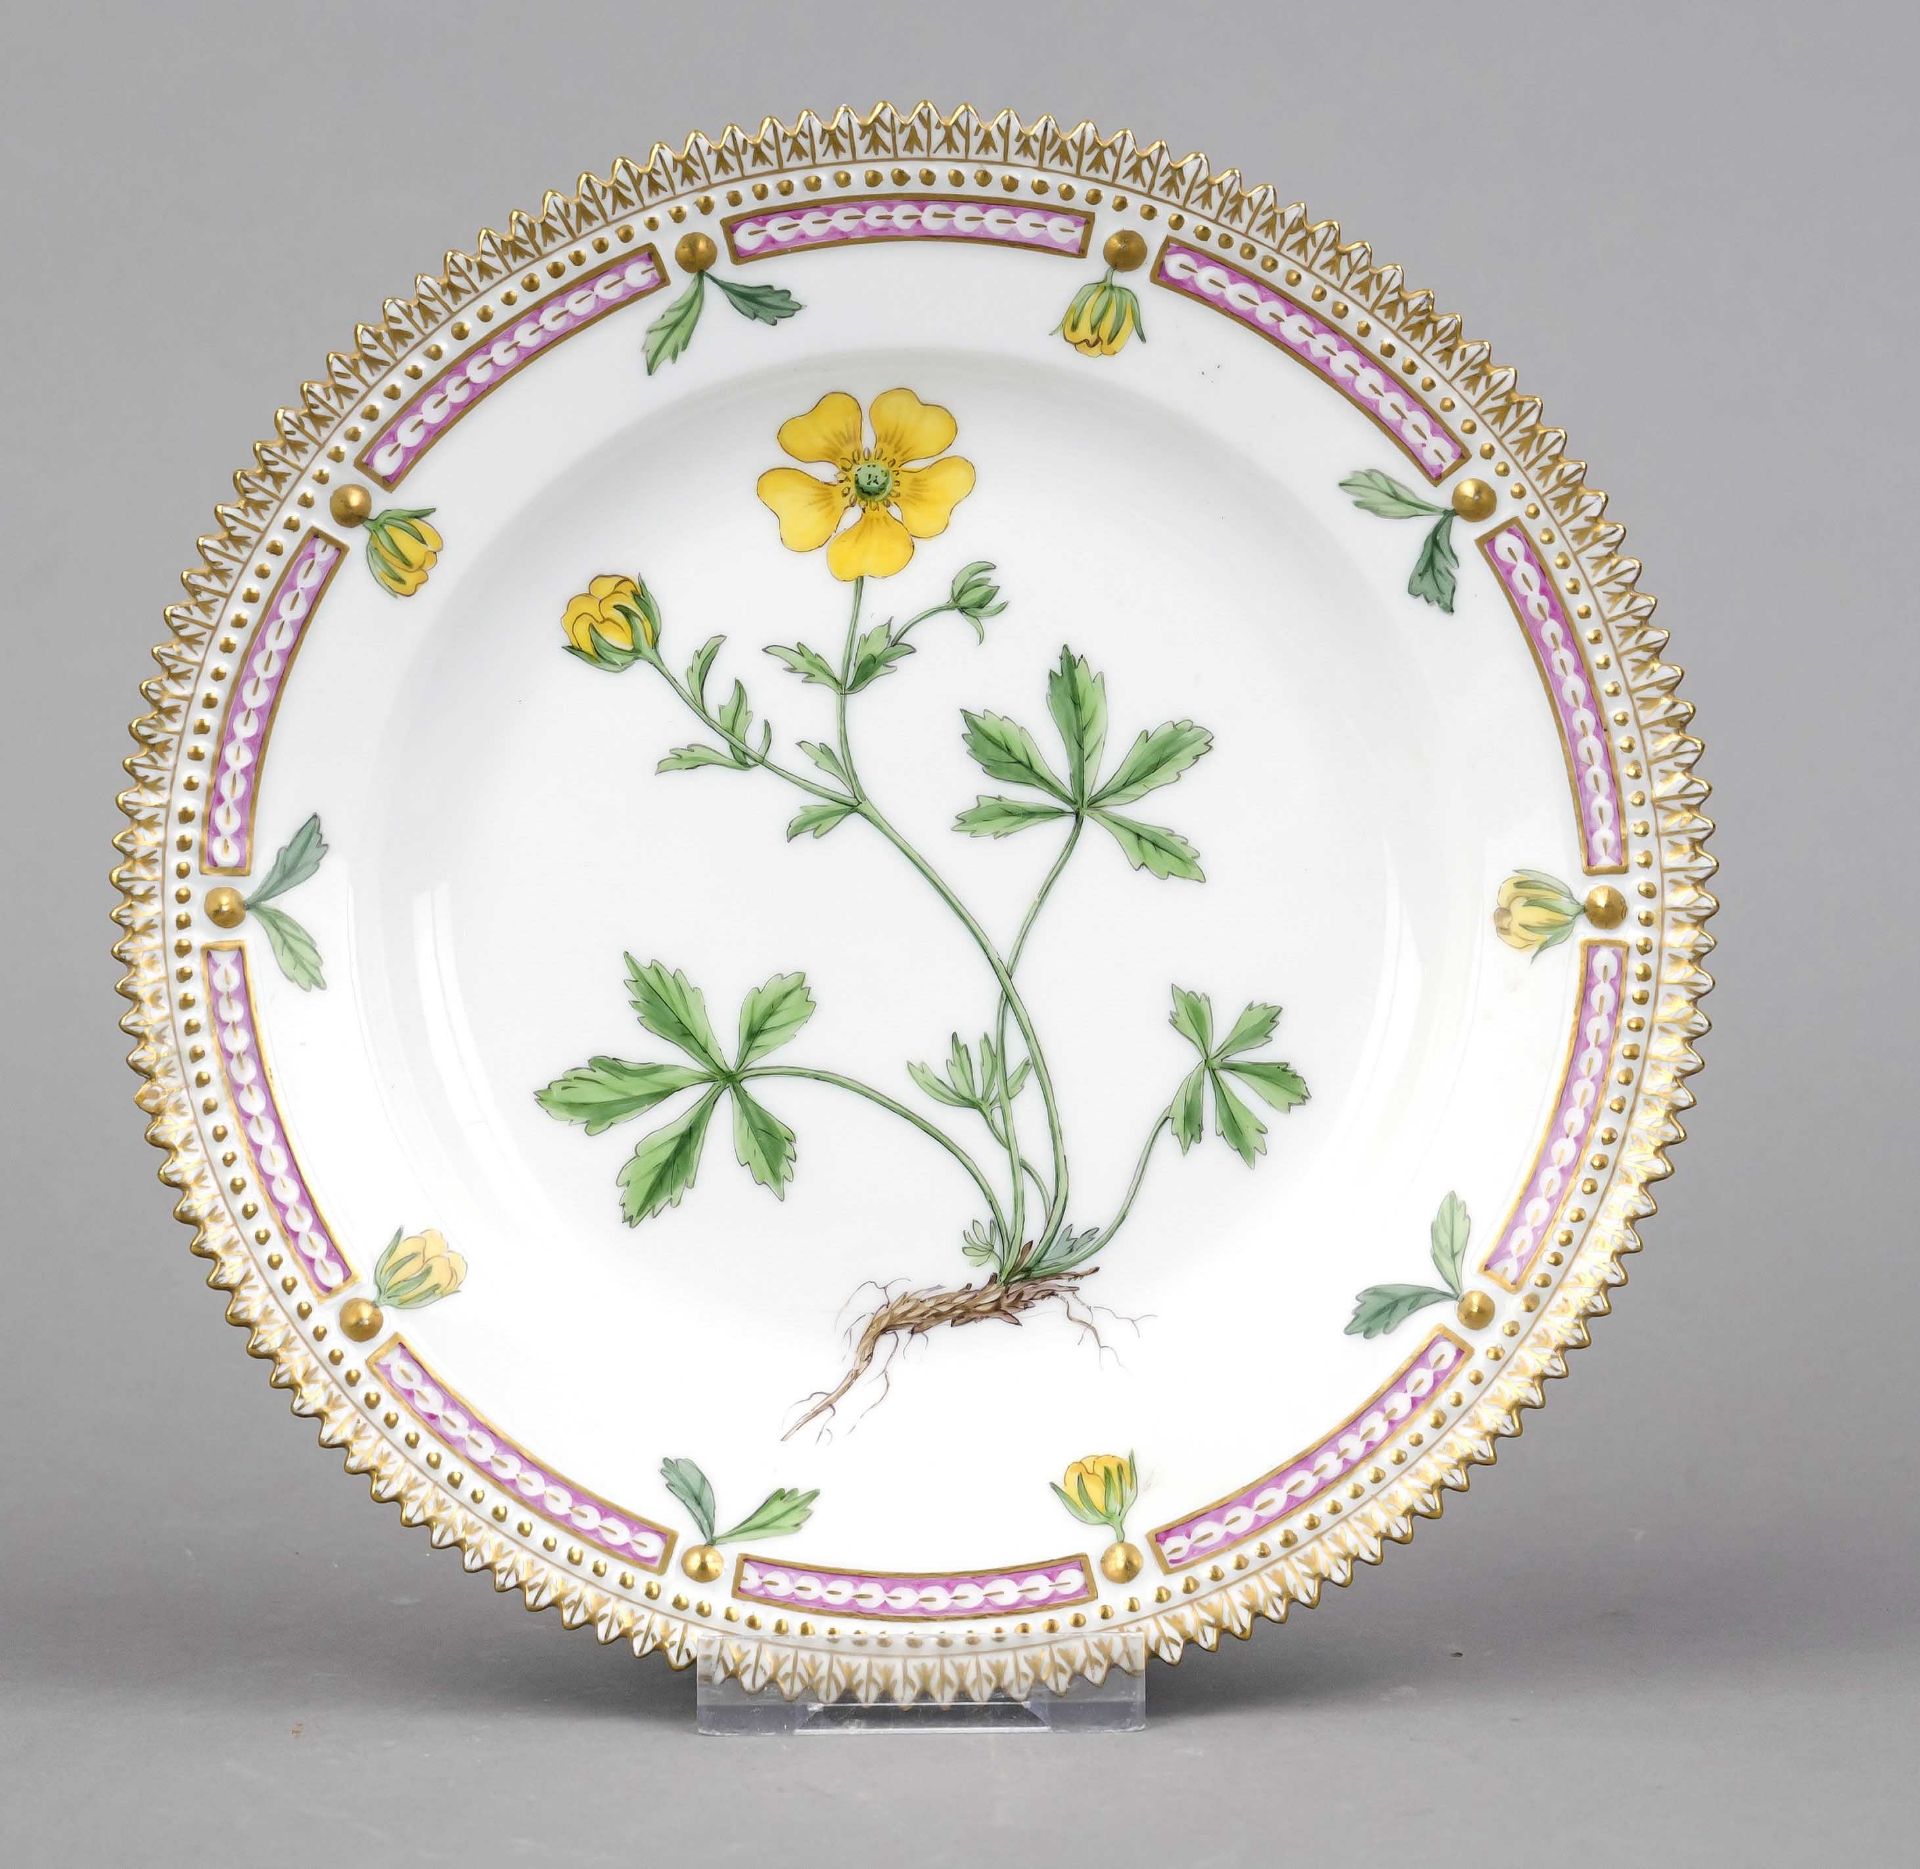 Small plate, Royal Copenhagen, mark 1947, 2nd choice, from the Flora Danica service, designed by